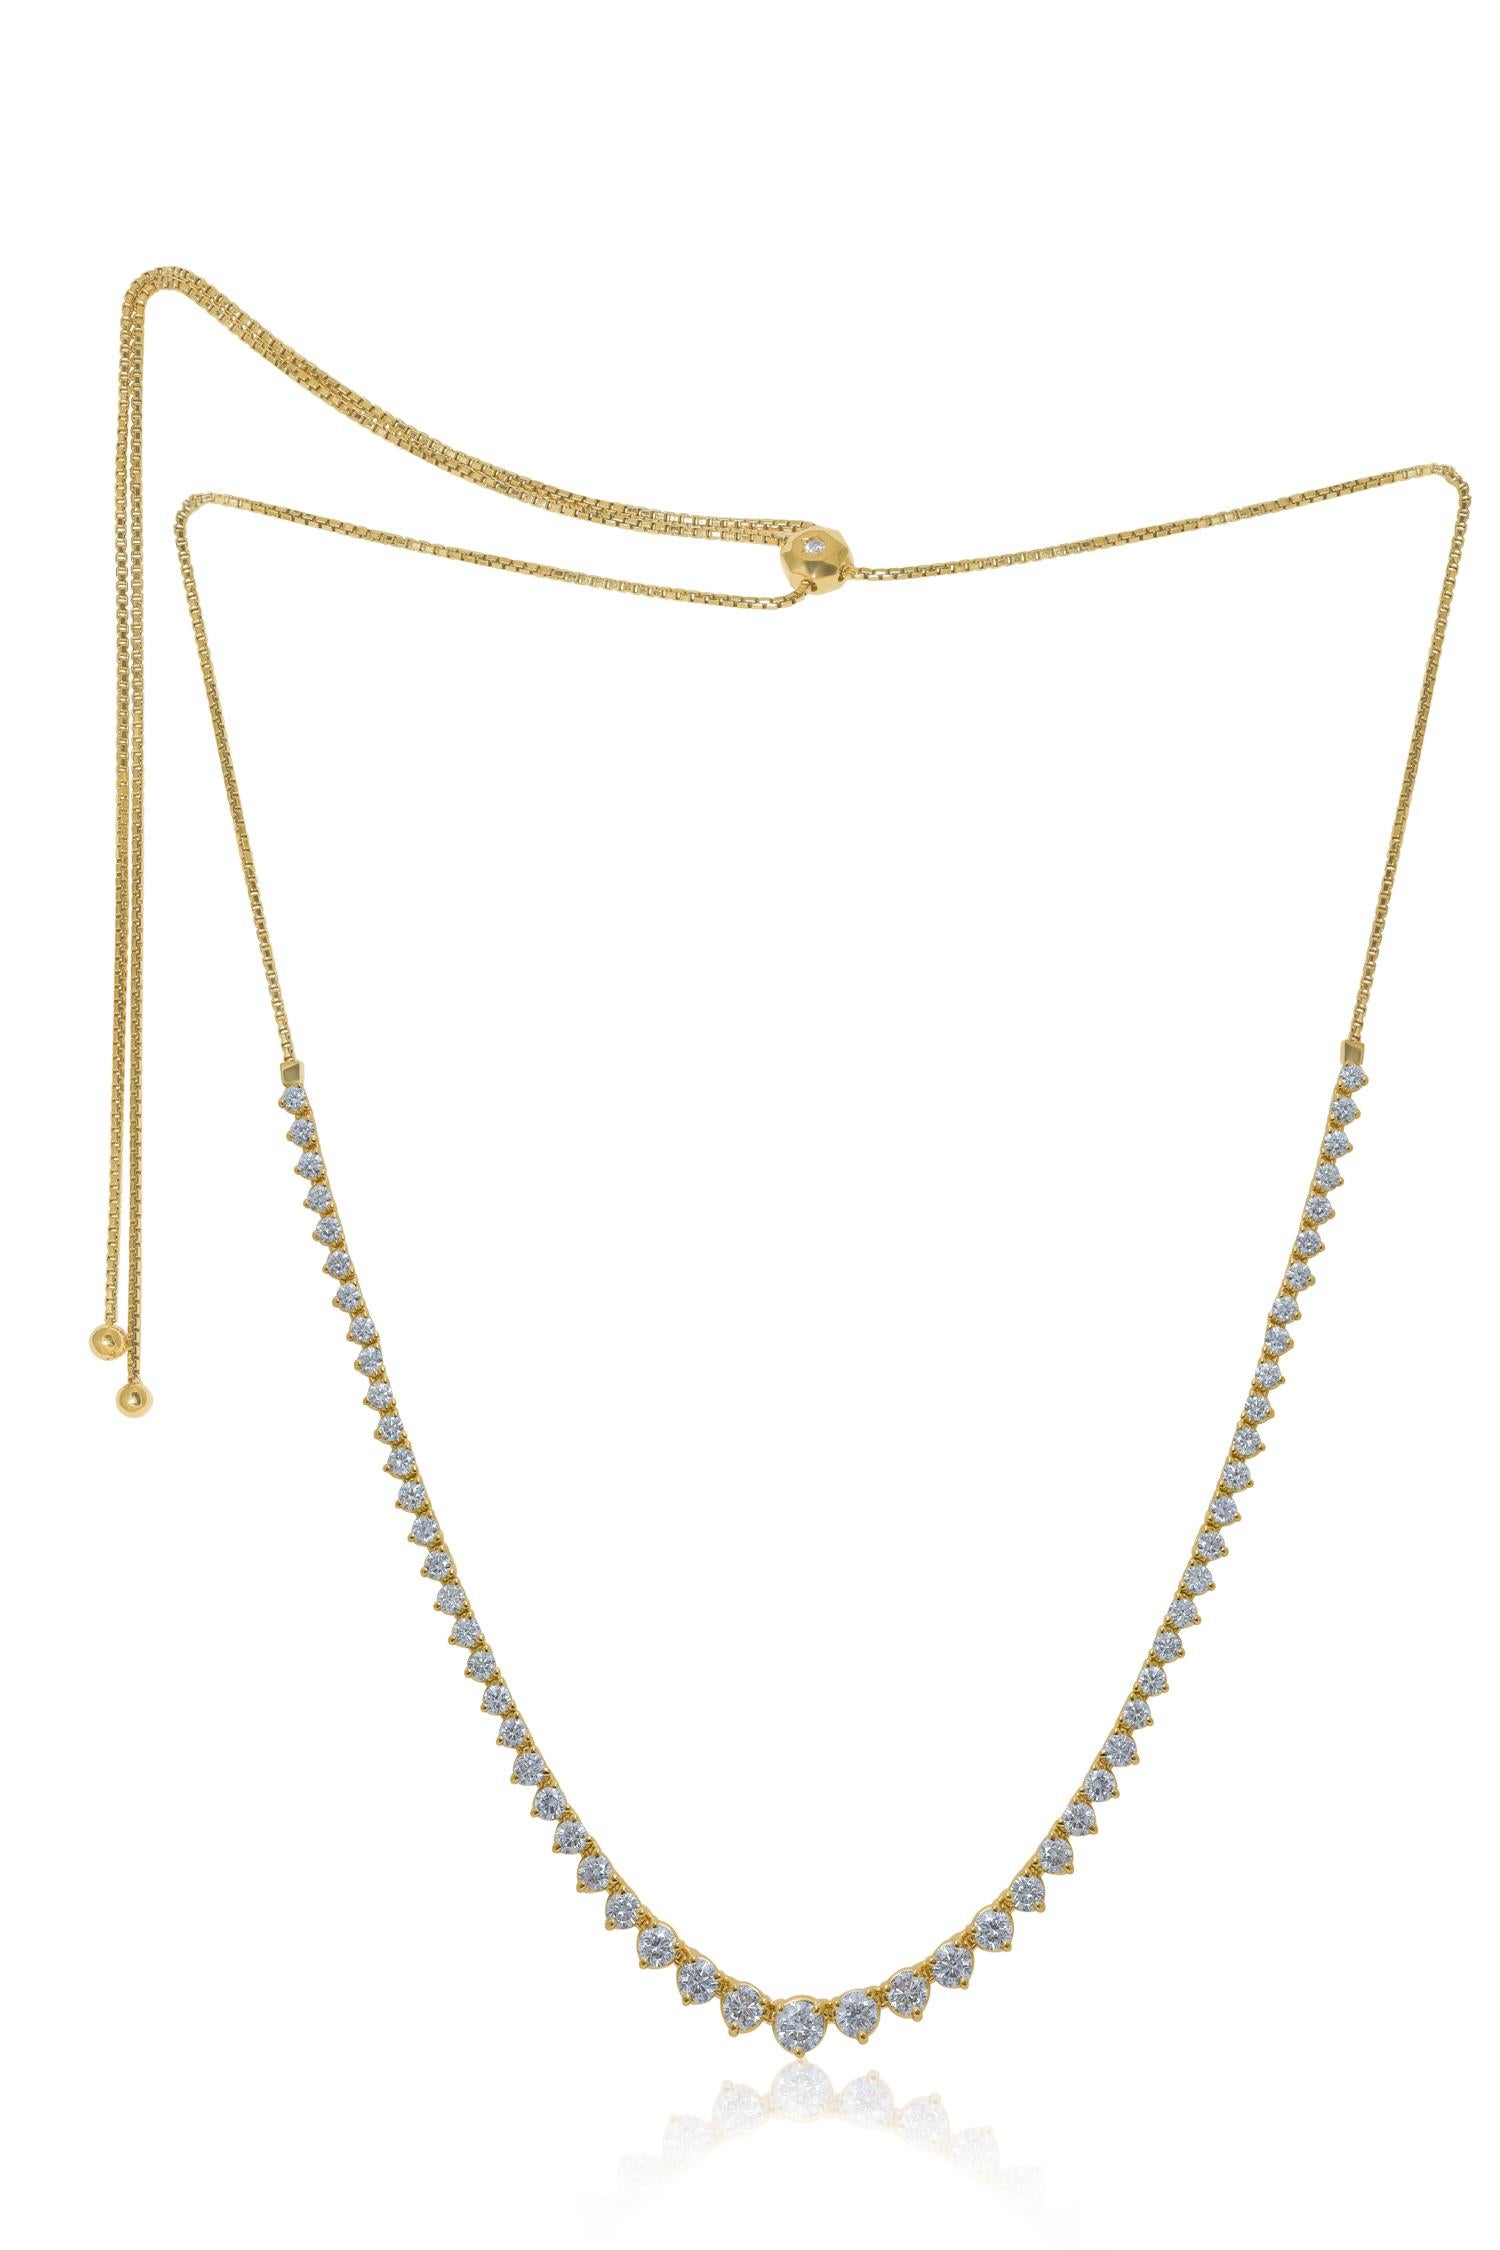 Modern Diana M. Custom 3.50 Cts Round Diamond 14k Yellow Gold Graduated Bolo Necklace For Sale